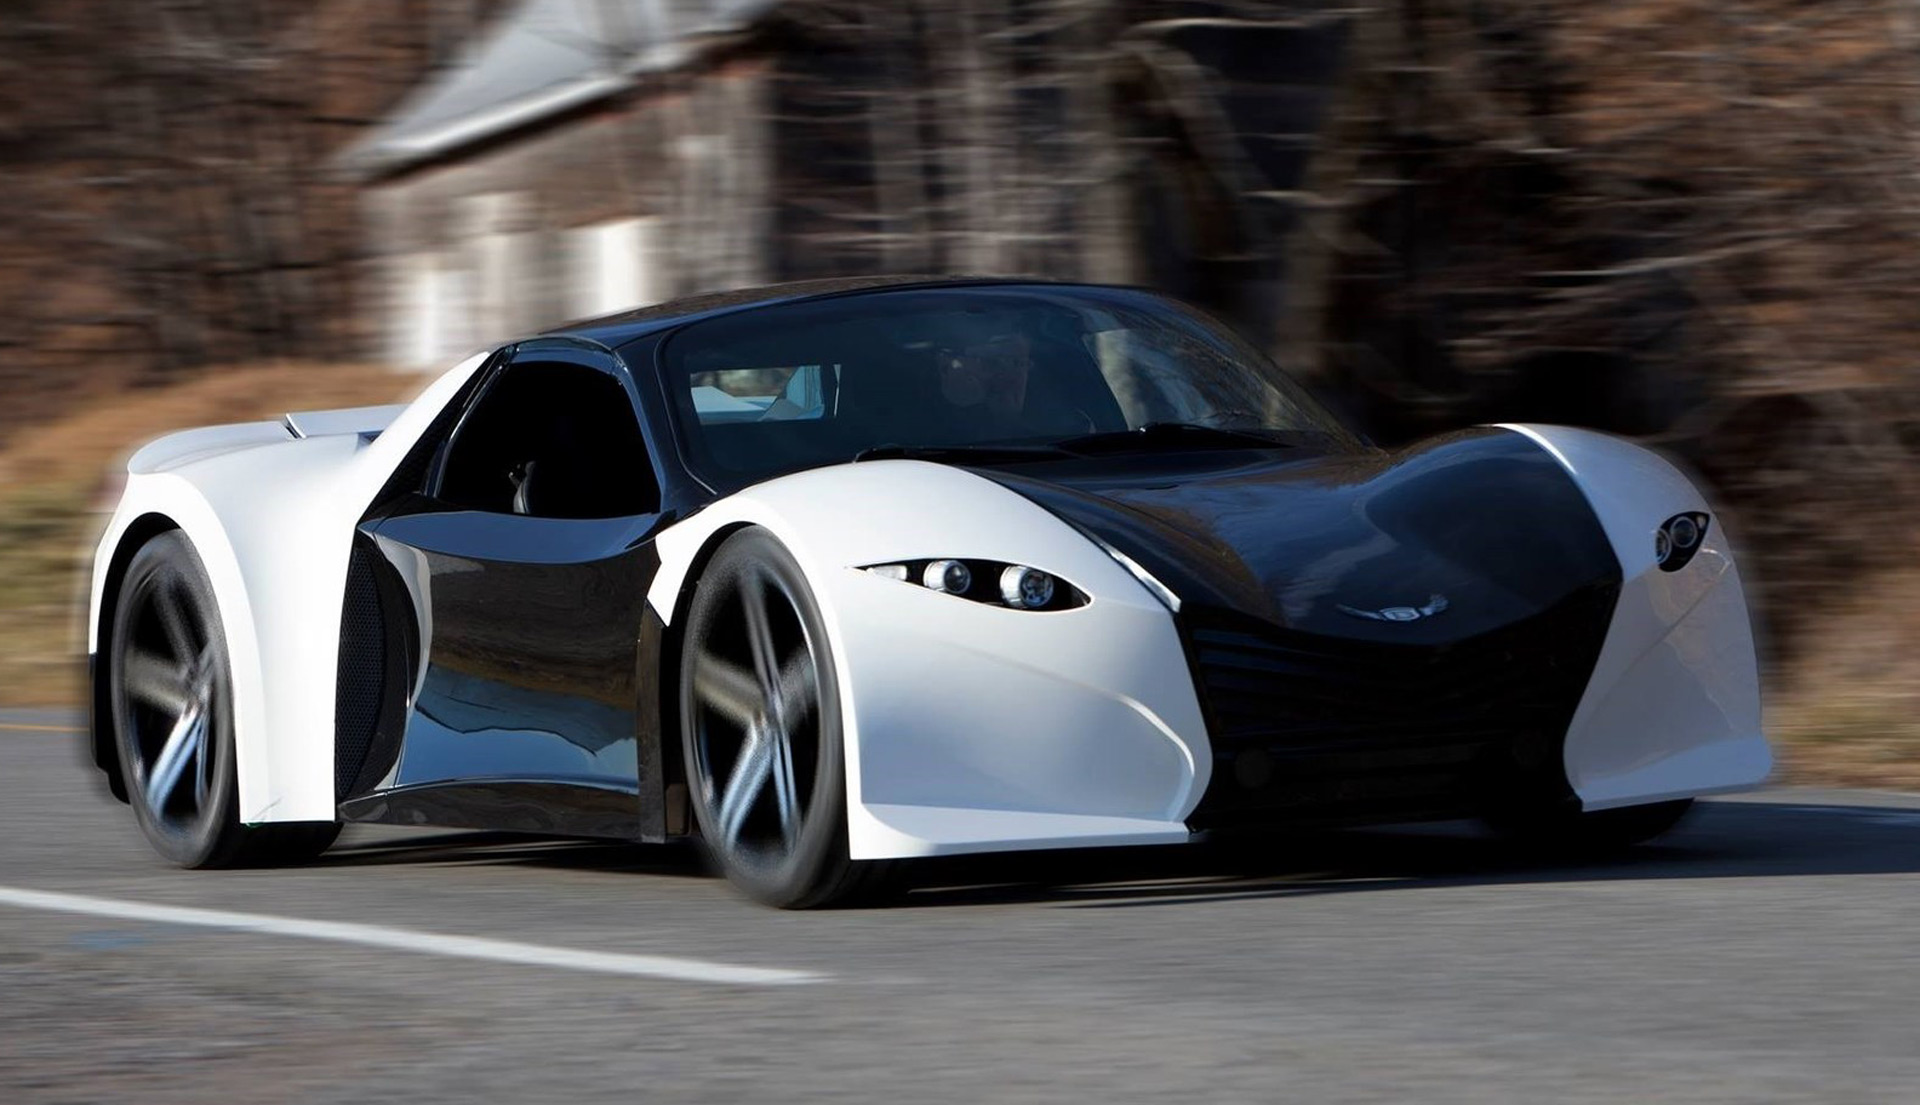 800hp Tomahawk electric supercar may enter production in 2018